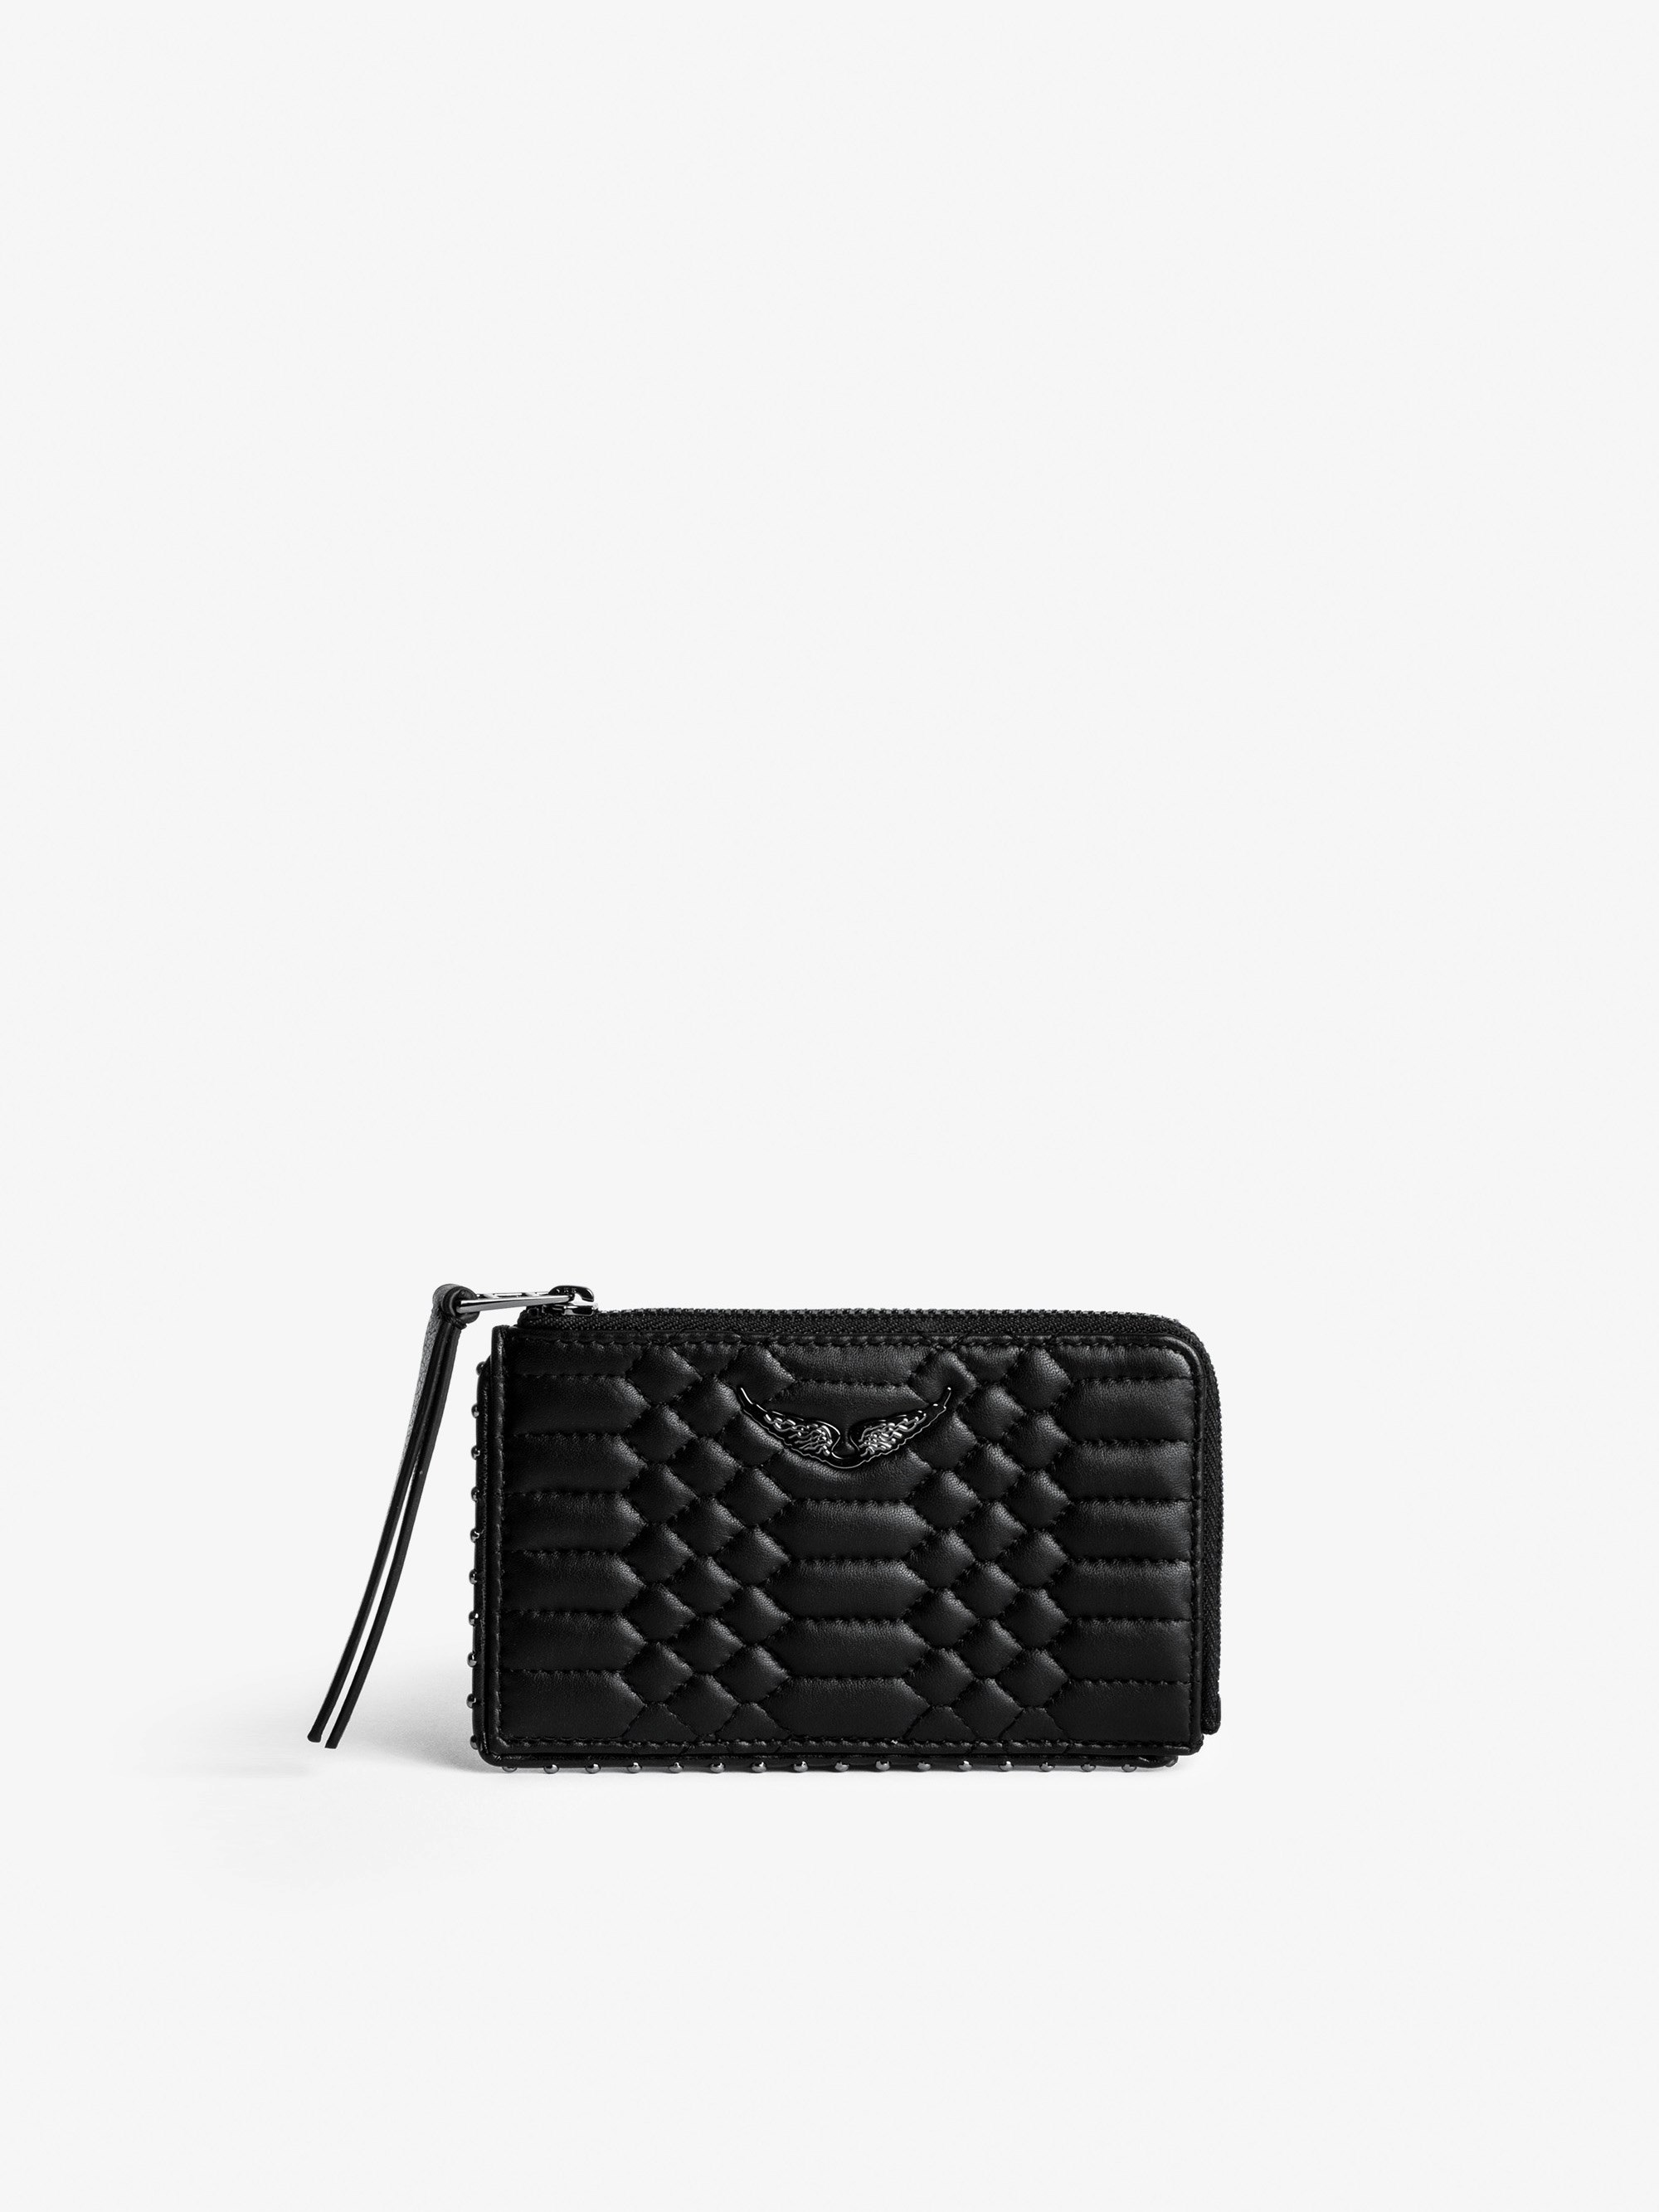 ZV Card Card Holder - Women’s quilted black leather card holder.